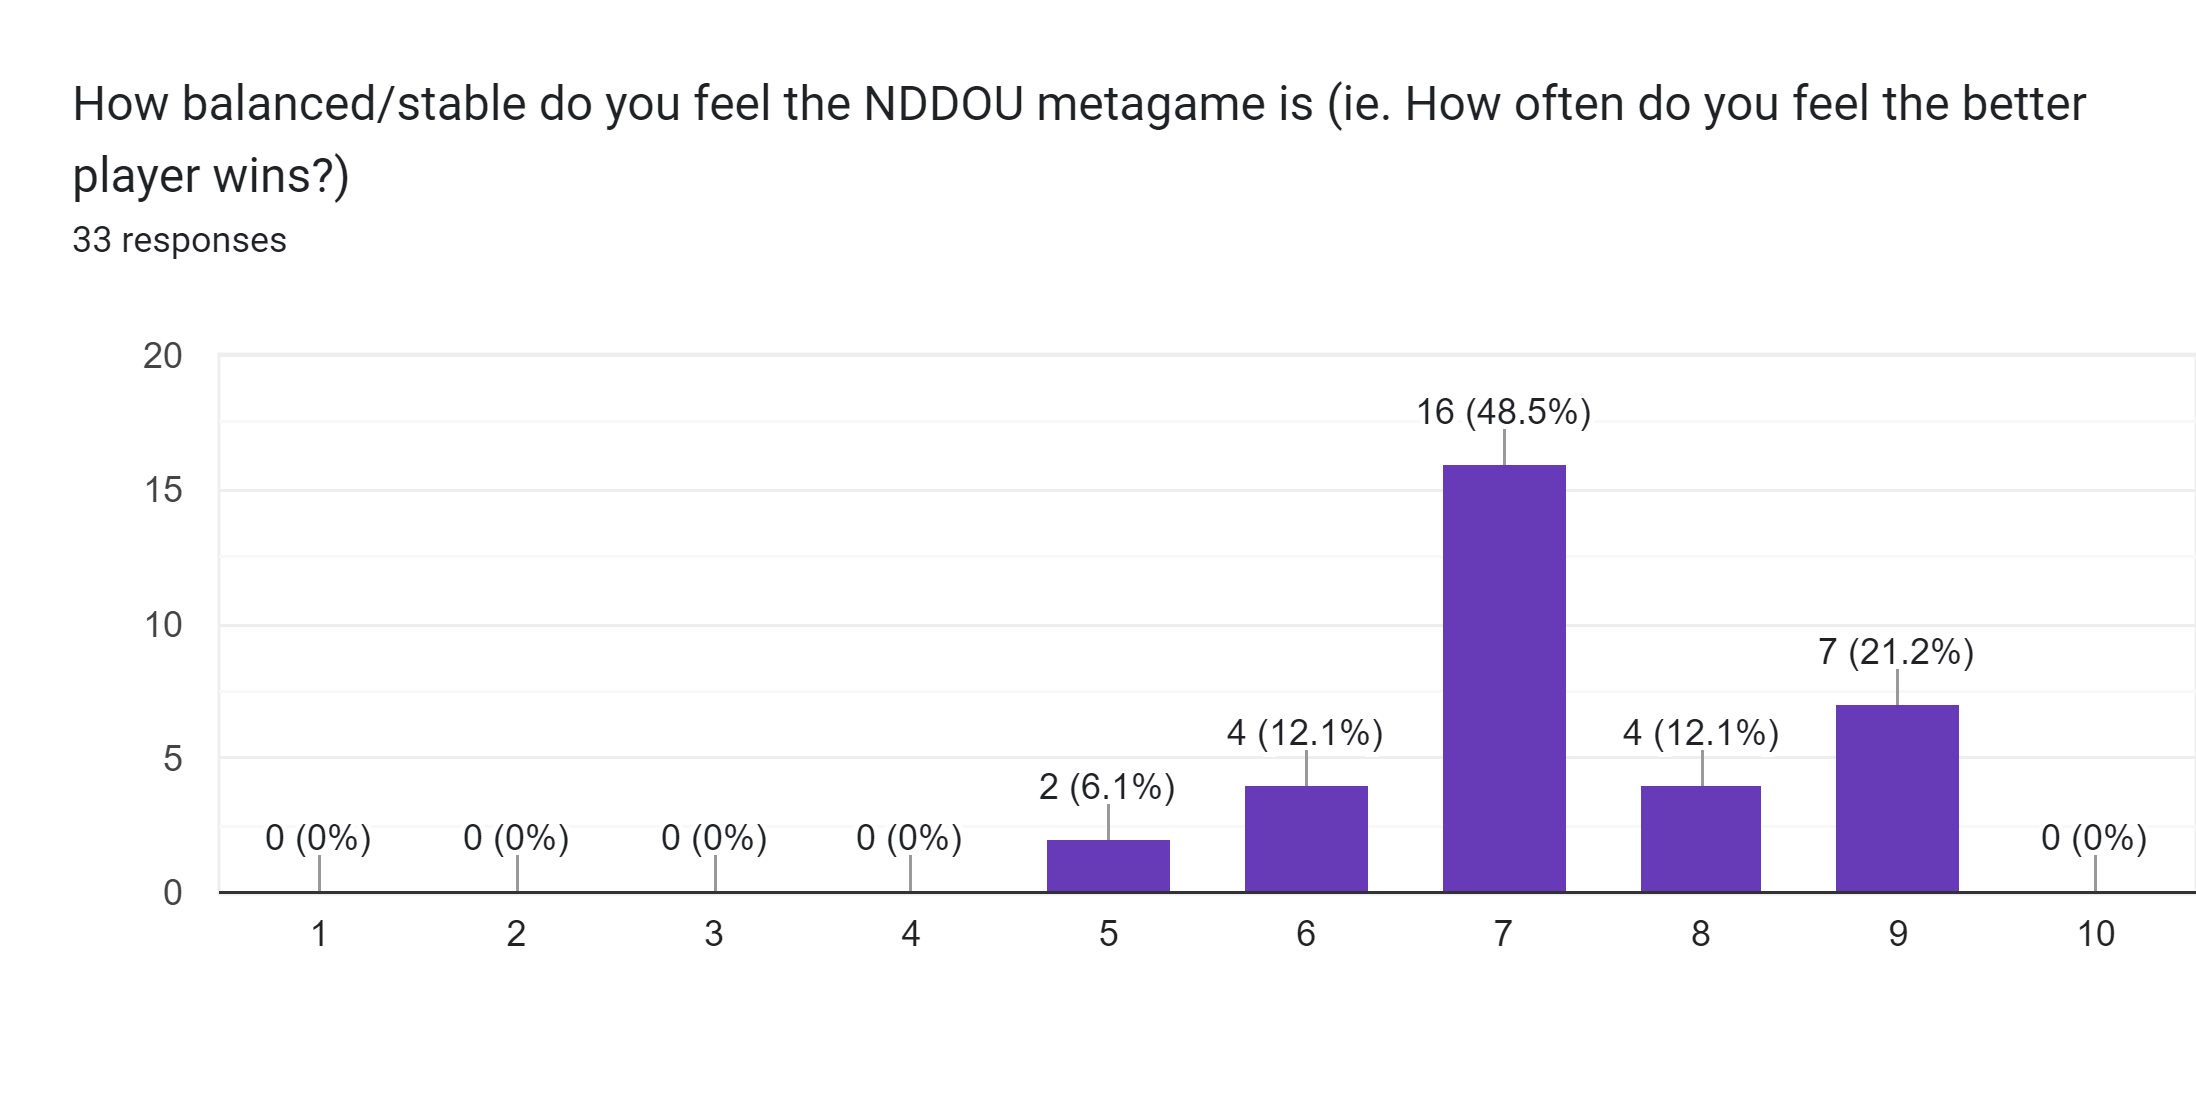 Forms response chart. Question title: How balanced/stable do you feel the NDDOU metagame is (ie. How often do you feel the better player wins?). Number of responses: 33 responses.